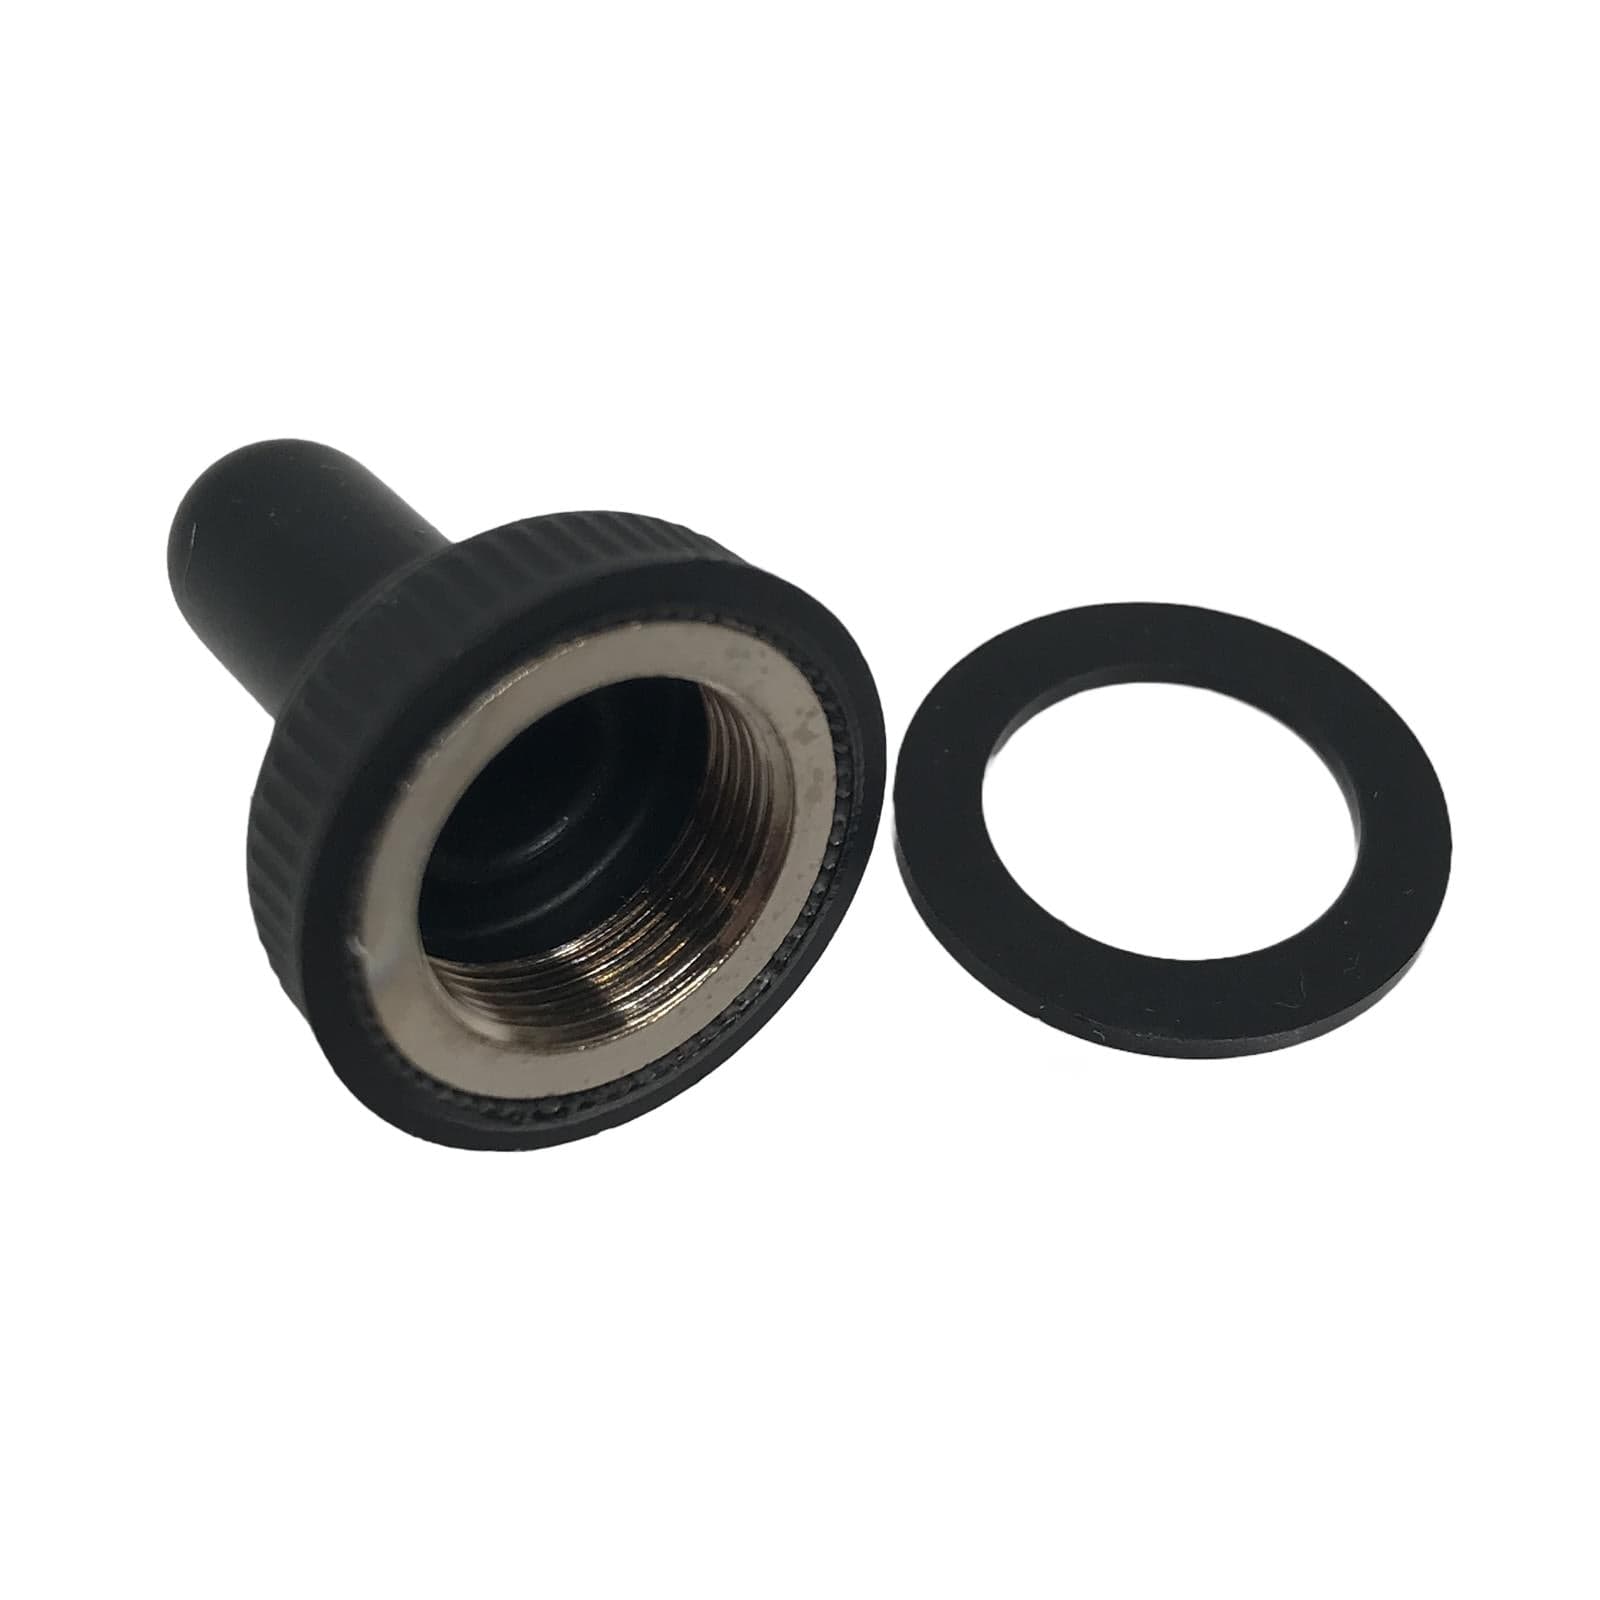 M12 Black Rubber Toggle Switch Cover With Washer Ring Service Item Thunderfix 902899